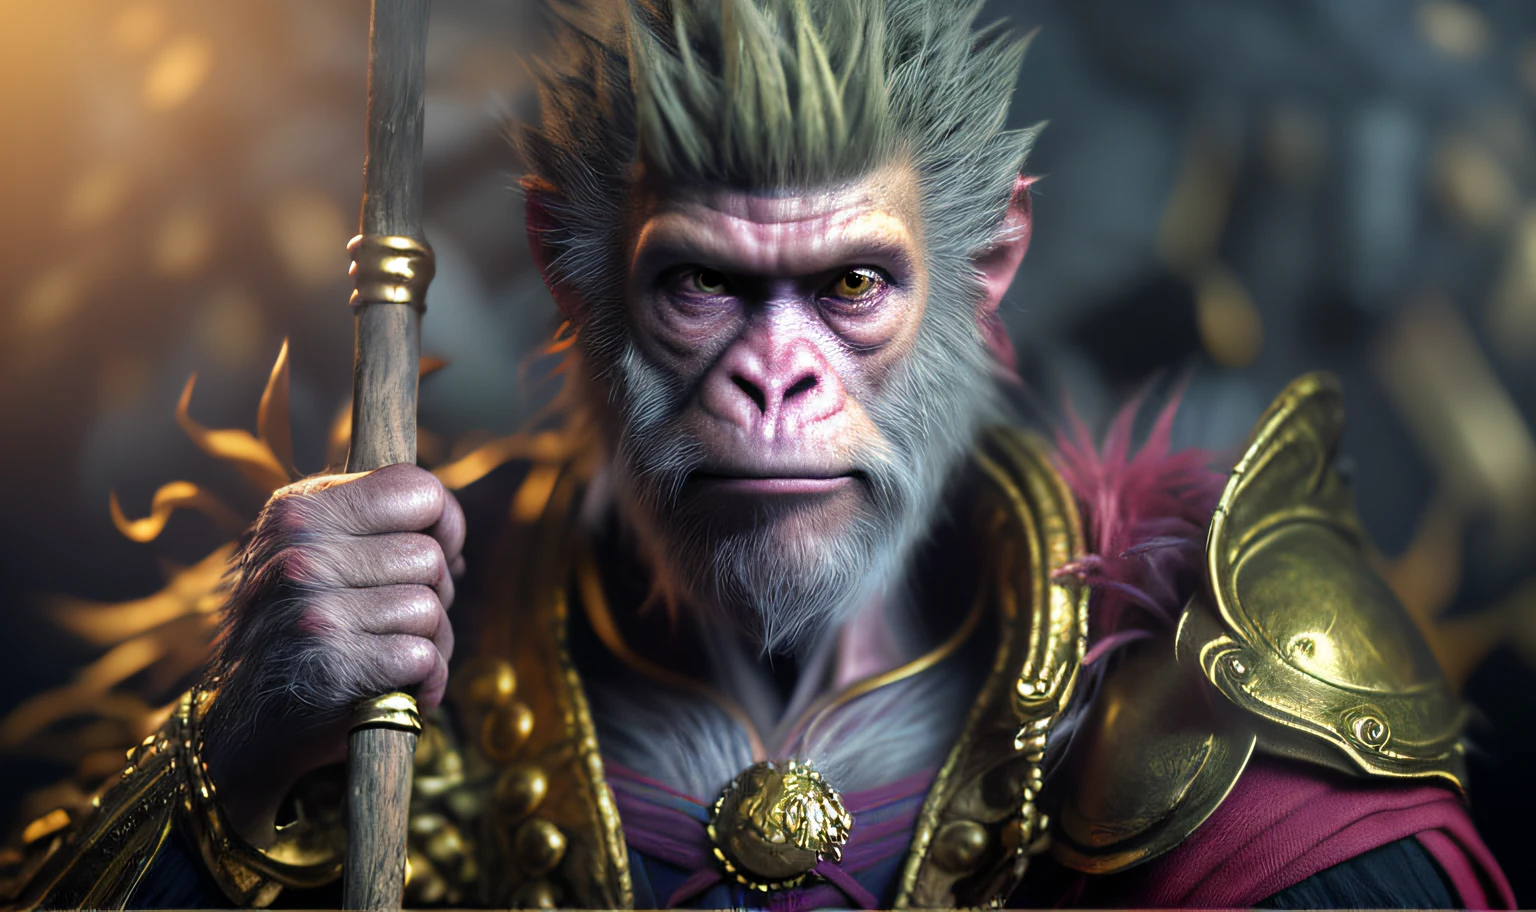 ((With a golden stick,Rotate the texture))，(Monkey transforms into bearded man 0, mito，dream magical，((Light exposure))，((marmoset render)), Wukong, unreal engine character art, Son Goku, 4k concept art and hyper realism, hyper-detailed fantasy character, cgsociety uhd 4k highly detailed, 3 d ape shaman profile portrait, Rendu portrait 8k, 8 k cg render,((dark aesthetic)))